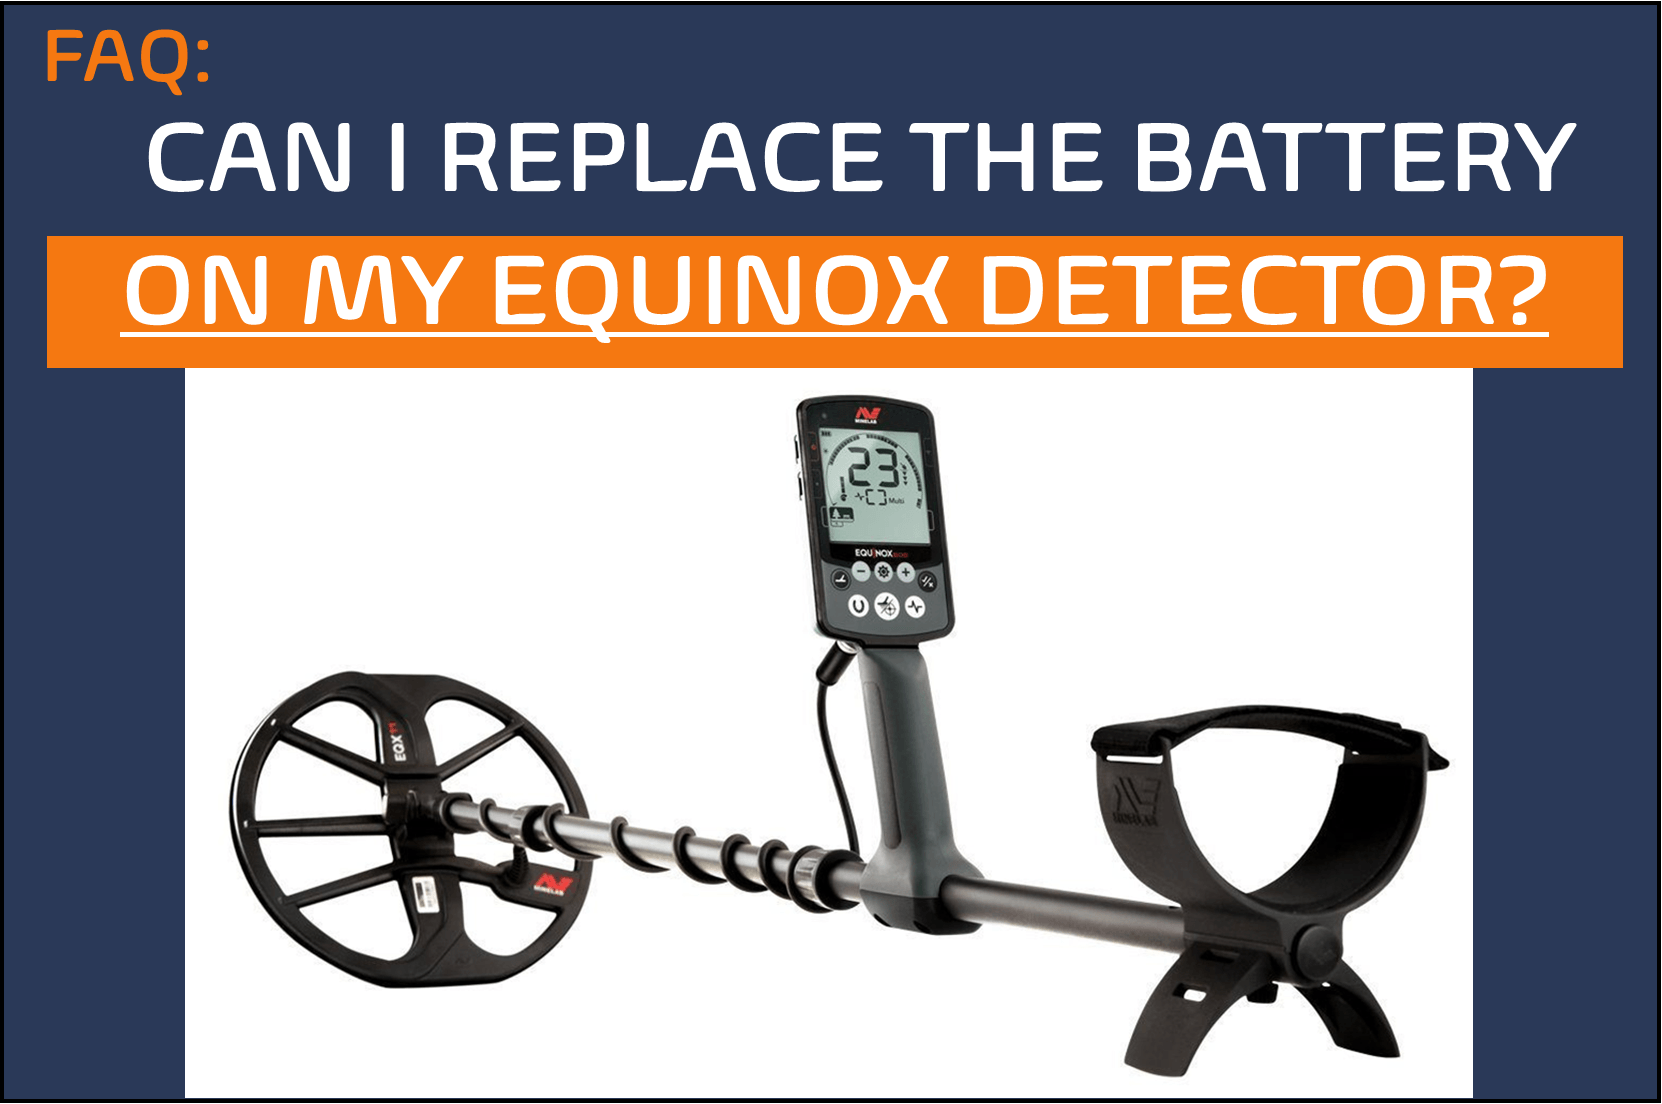 FAQ: Can you replace the batteries on a Minelab Equinox Metal Detector? - YES!